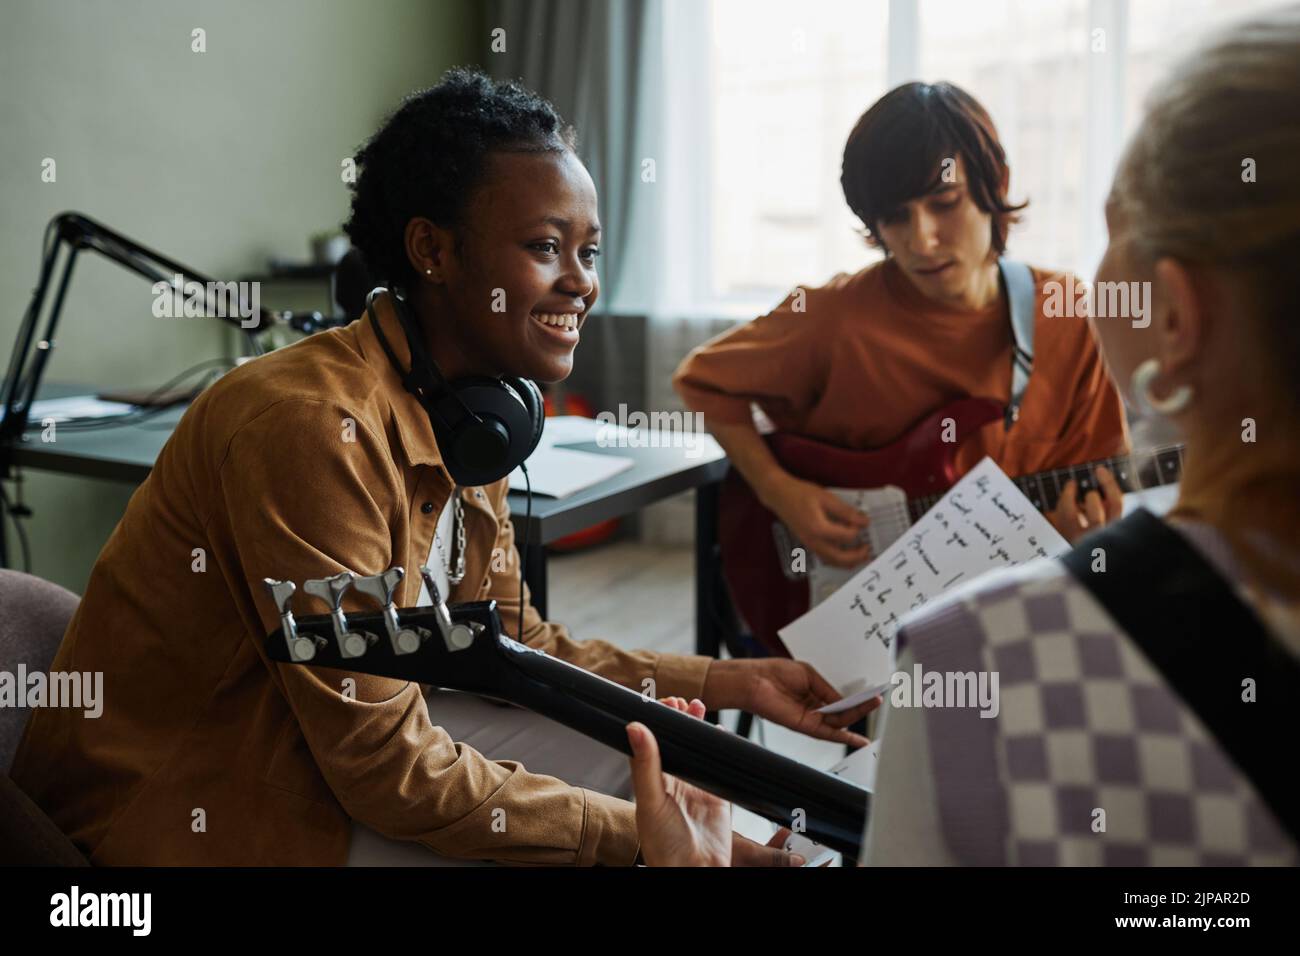 Side view portrait of black young woman writing music with band and smiling happily Stock Photo